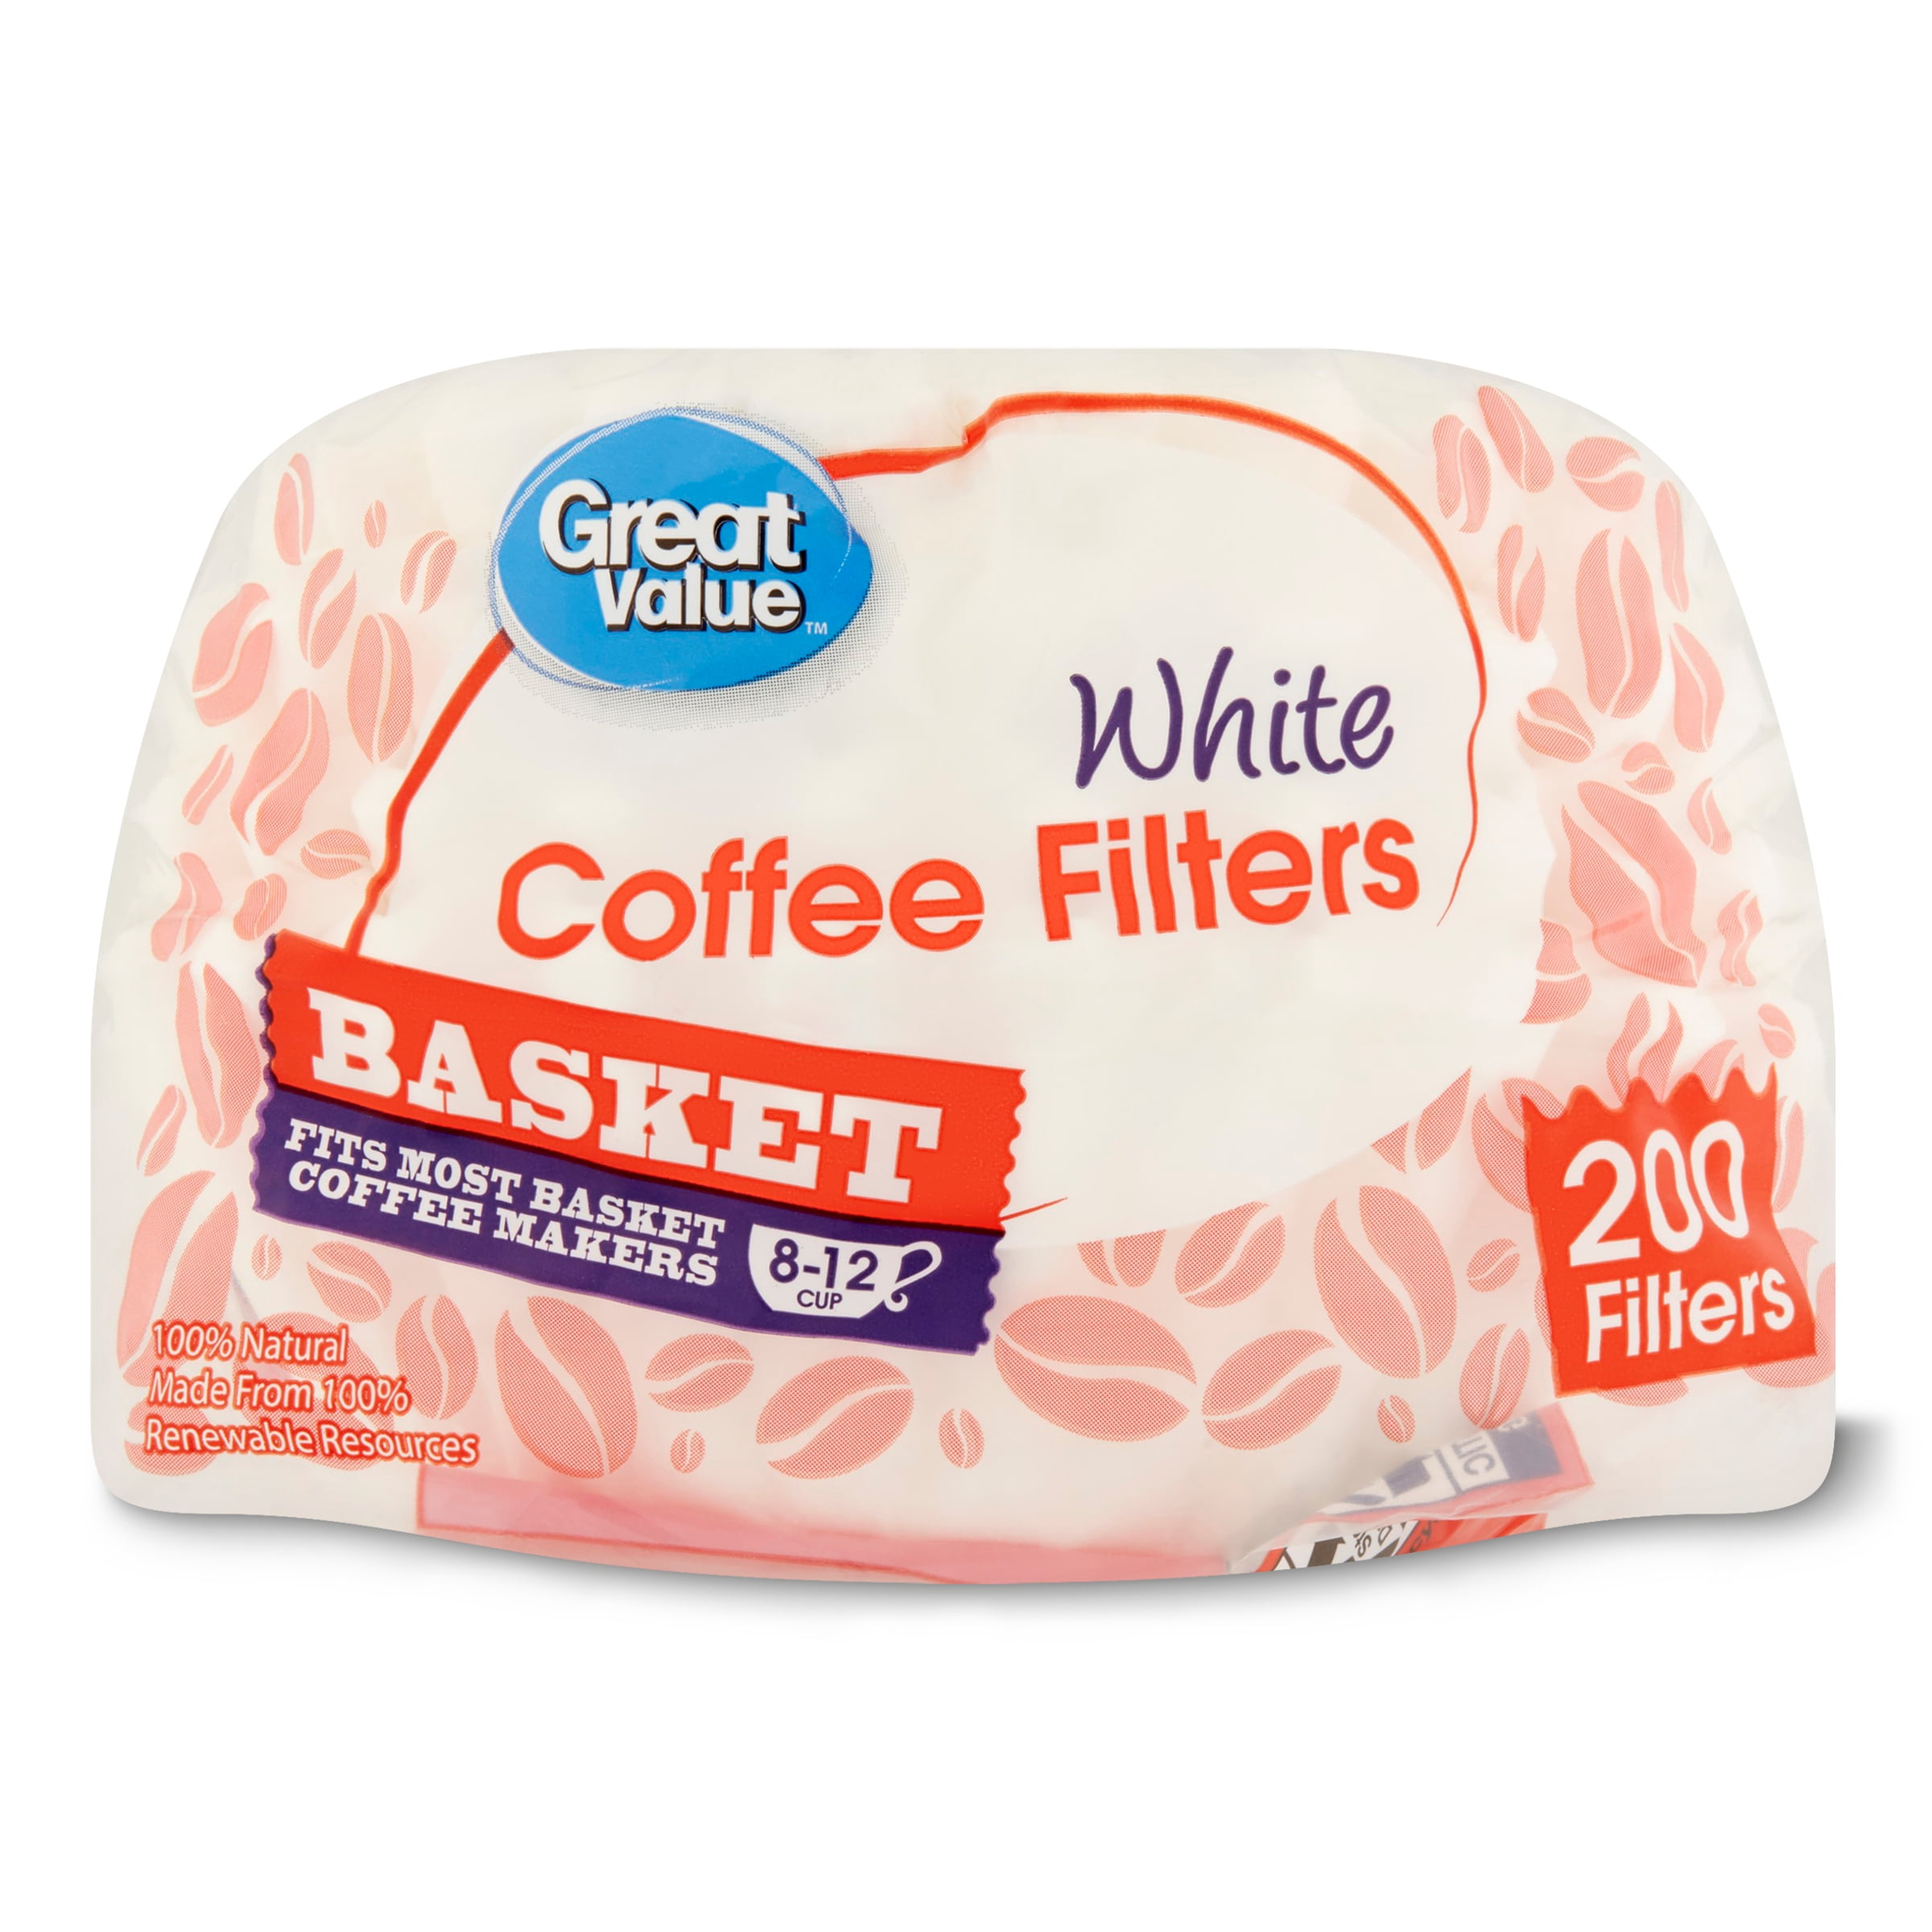 Great Value White Basket Coffee Filters, 200 count